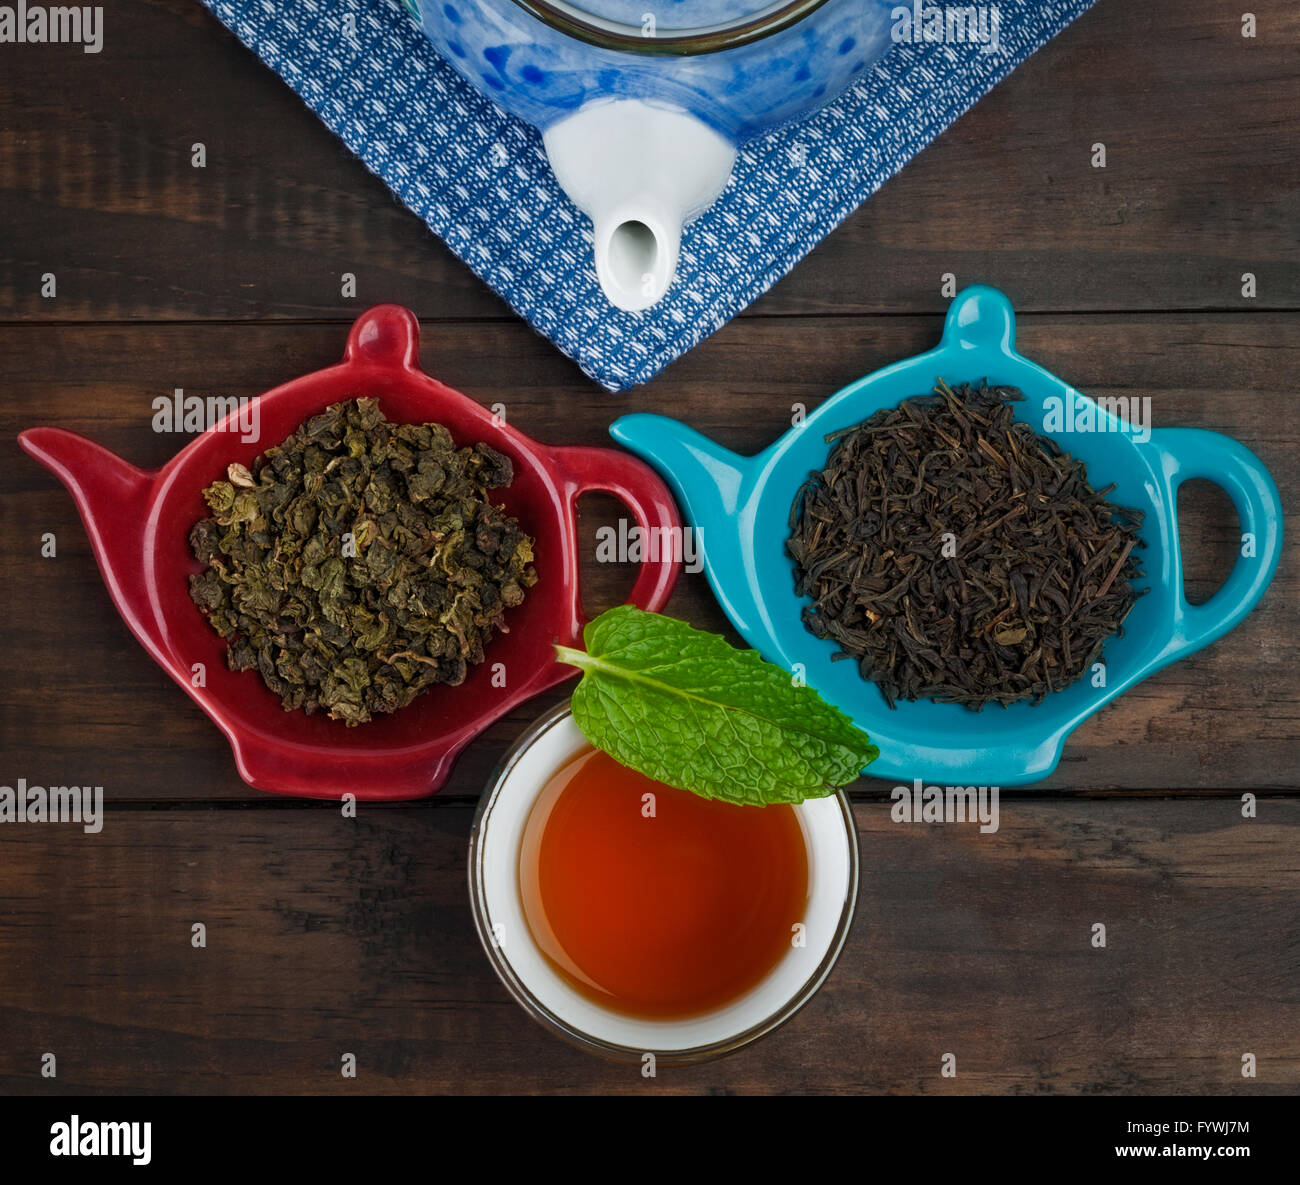 Closeup of teapot, whole leaf tea varieties and teacup with mint leaf on wooden table. Top view. Stock Photo